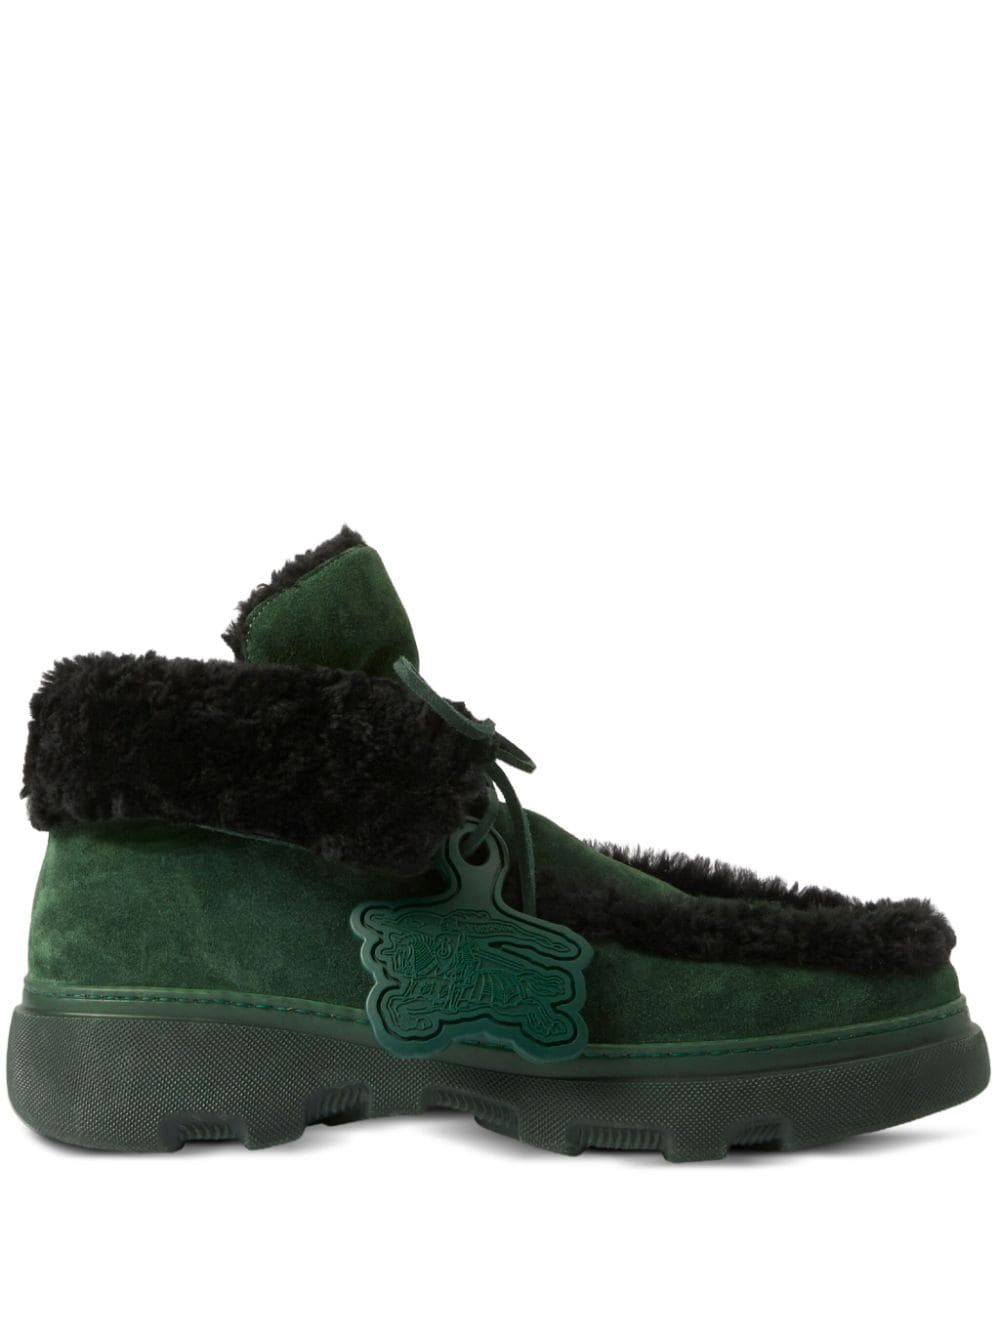 Burberry Creeper shearling boots - Green von Burberry